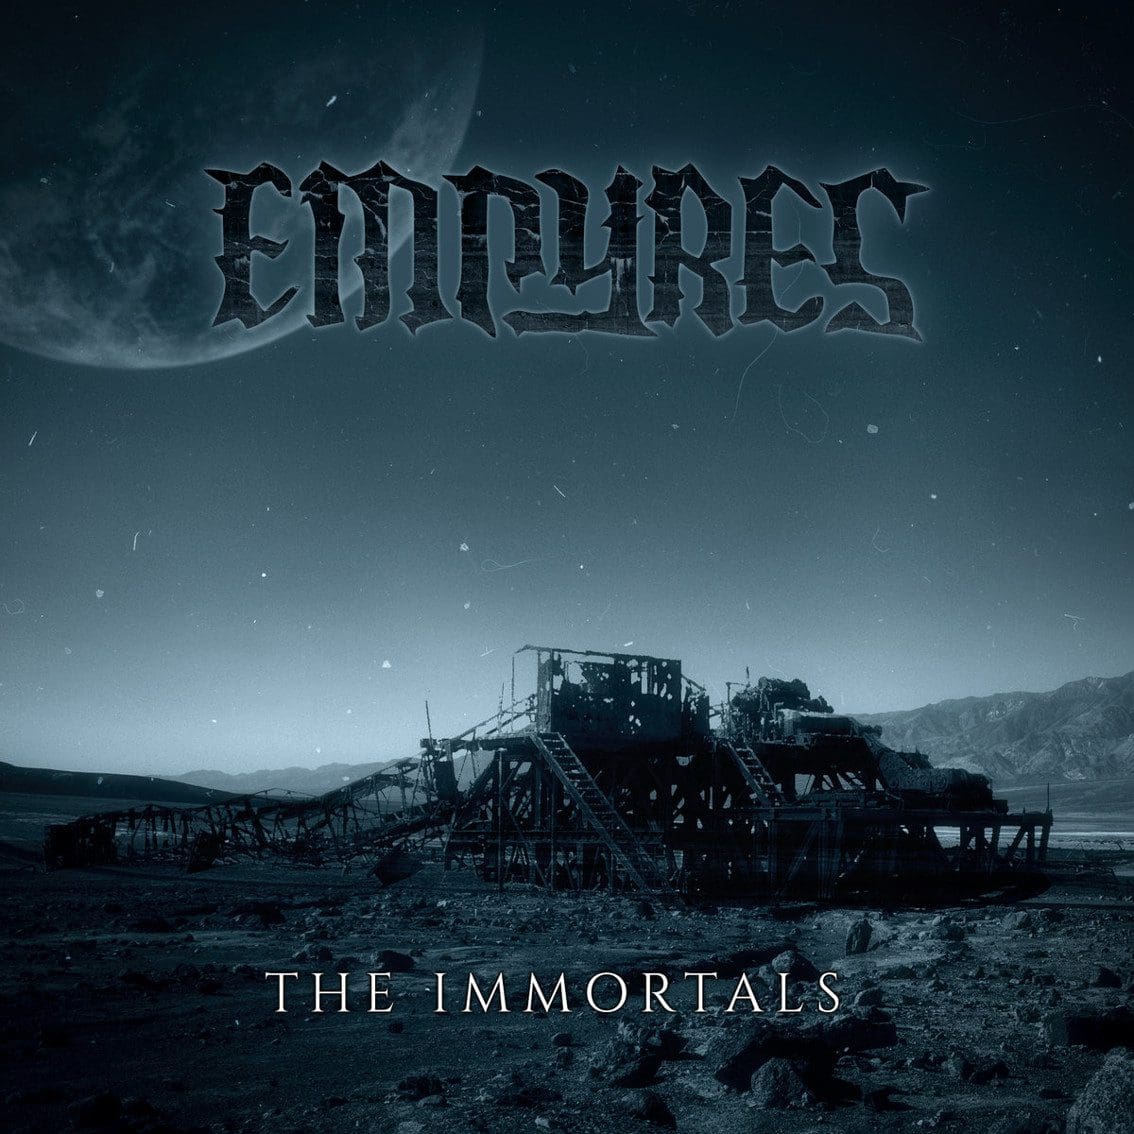 Debut single 'The Immortals' by Empyres lands on Insane Records